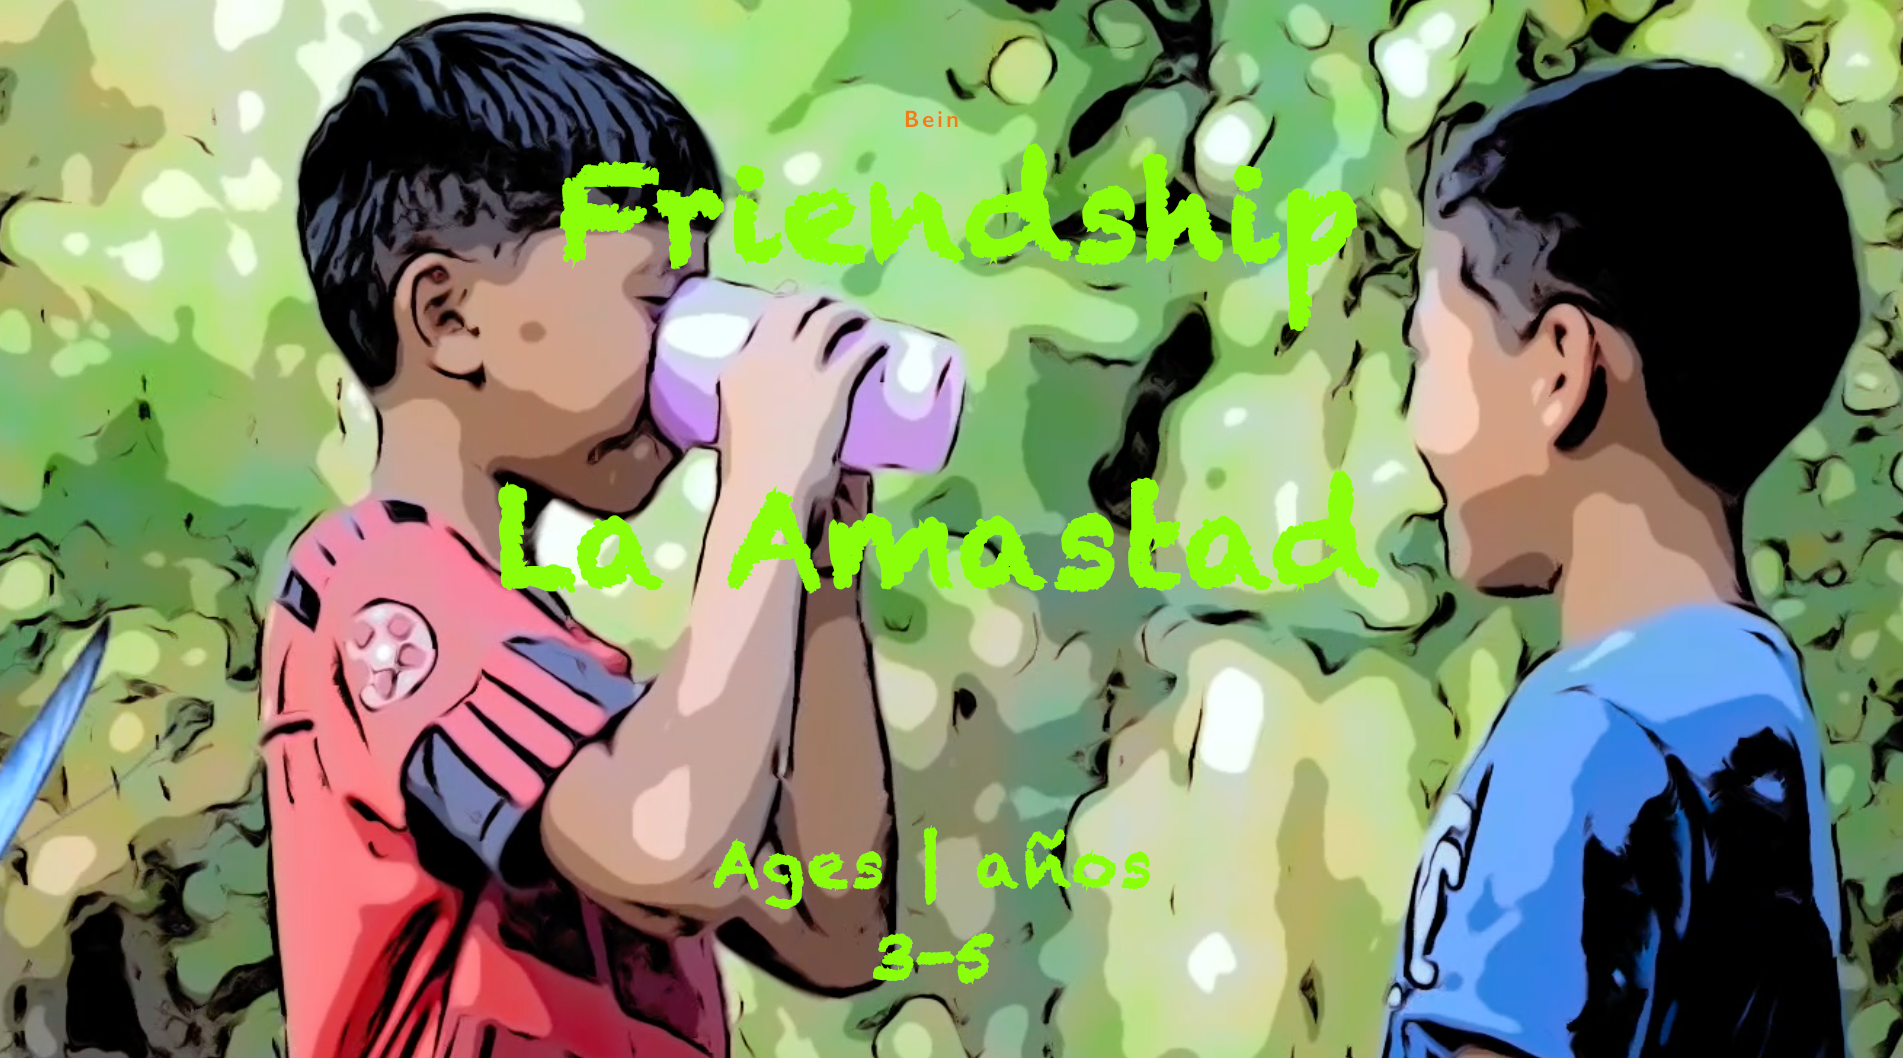 Friendship for 3-5 year olds